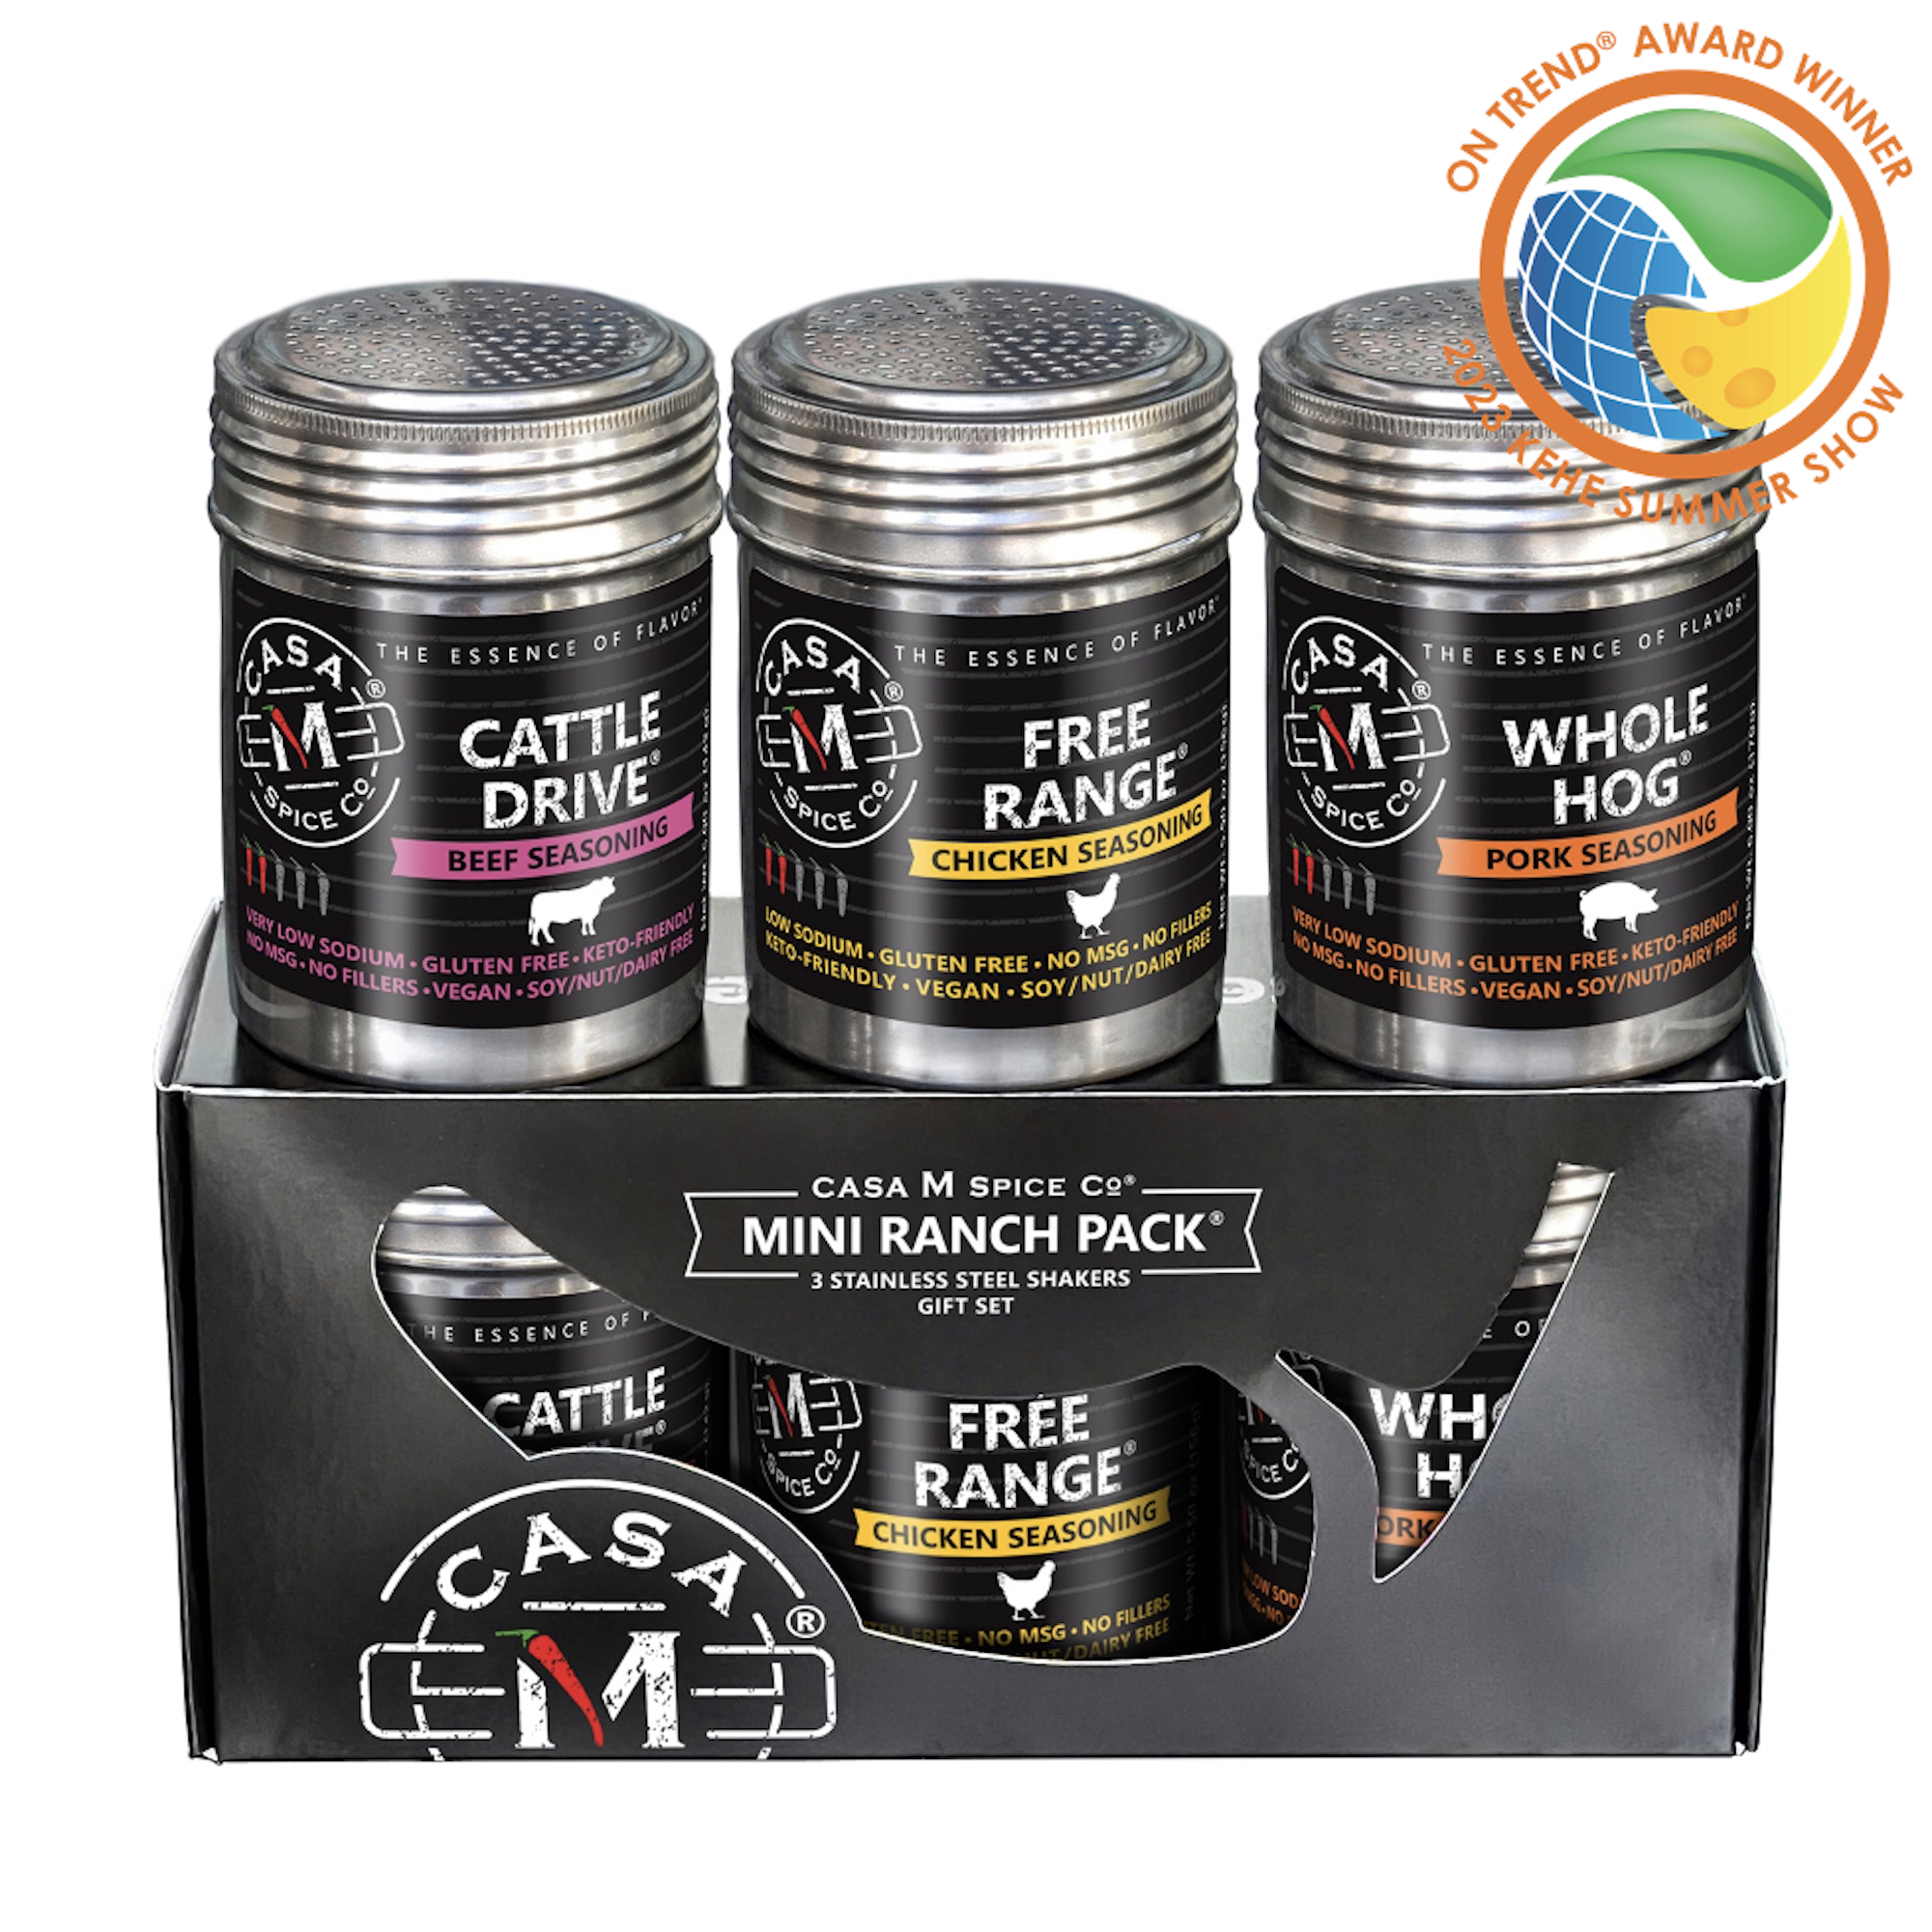 Casa M Spice Co's Mini Ranch Pack® is OnTrend®!